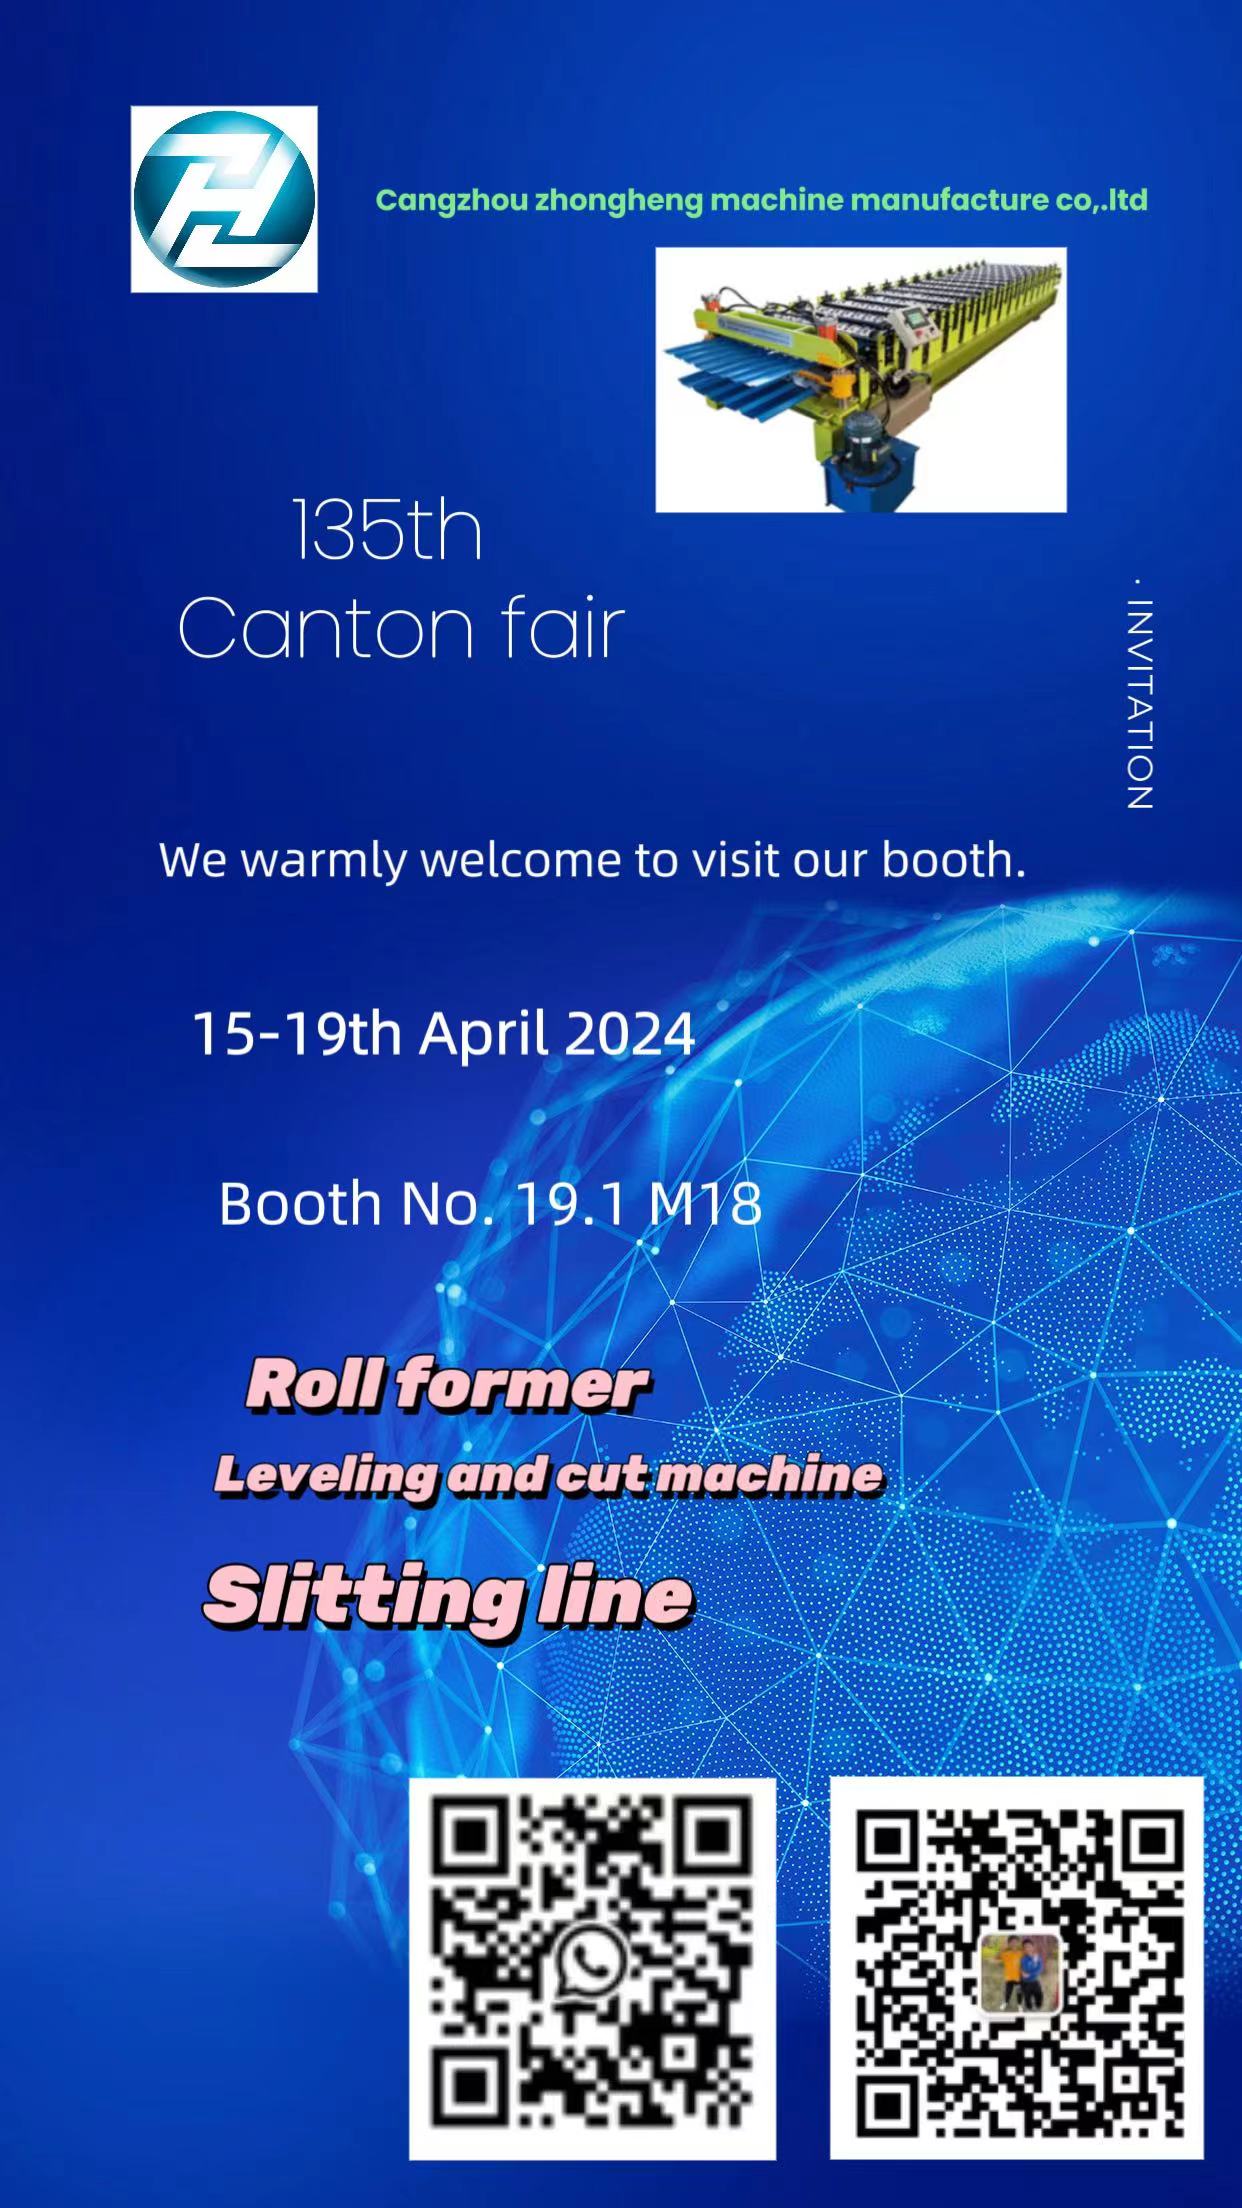 we will attend the 135th canton fair in guangzhou 